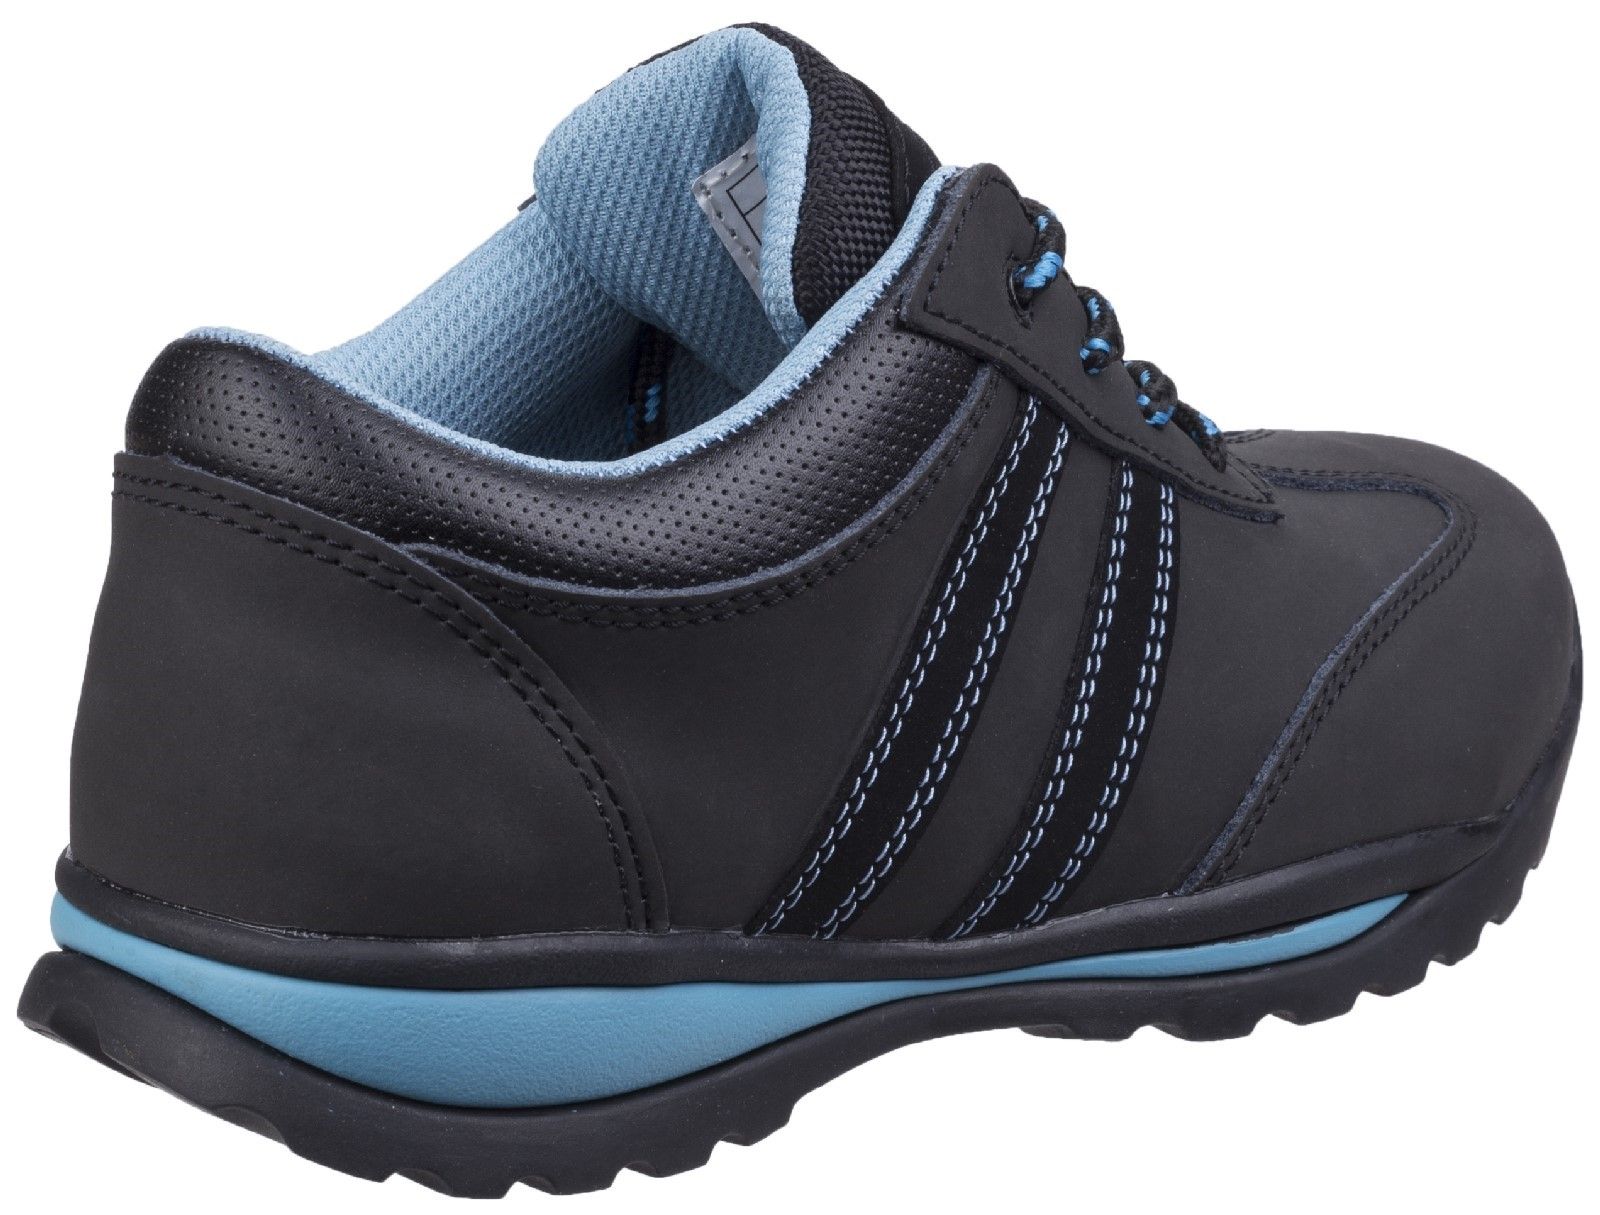 Women's modern lightweight safety trainer crafted with Nubuck Leather, PU padded collar, anti-static and durable full Rubber outsole.Nubuck Leather upper. 
Moisture wicking breathable mesh lining. 
200 Joules Steel toe cap. 
Penetration resistance Steel midsole to 1100 Newtons. 
Anti-static.